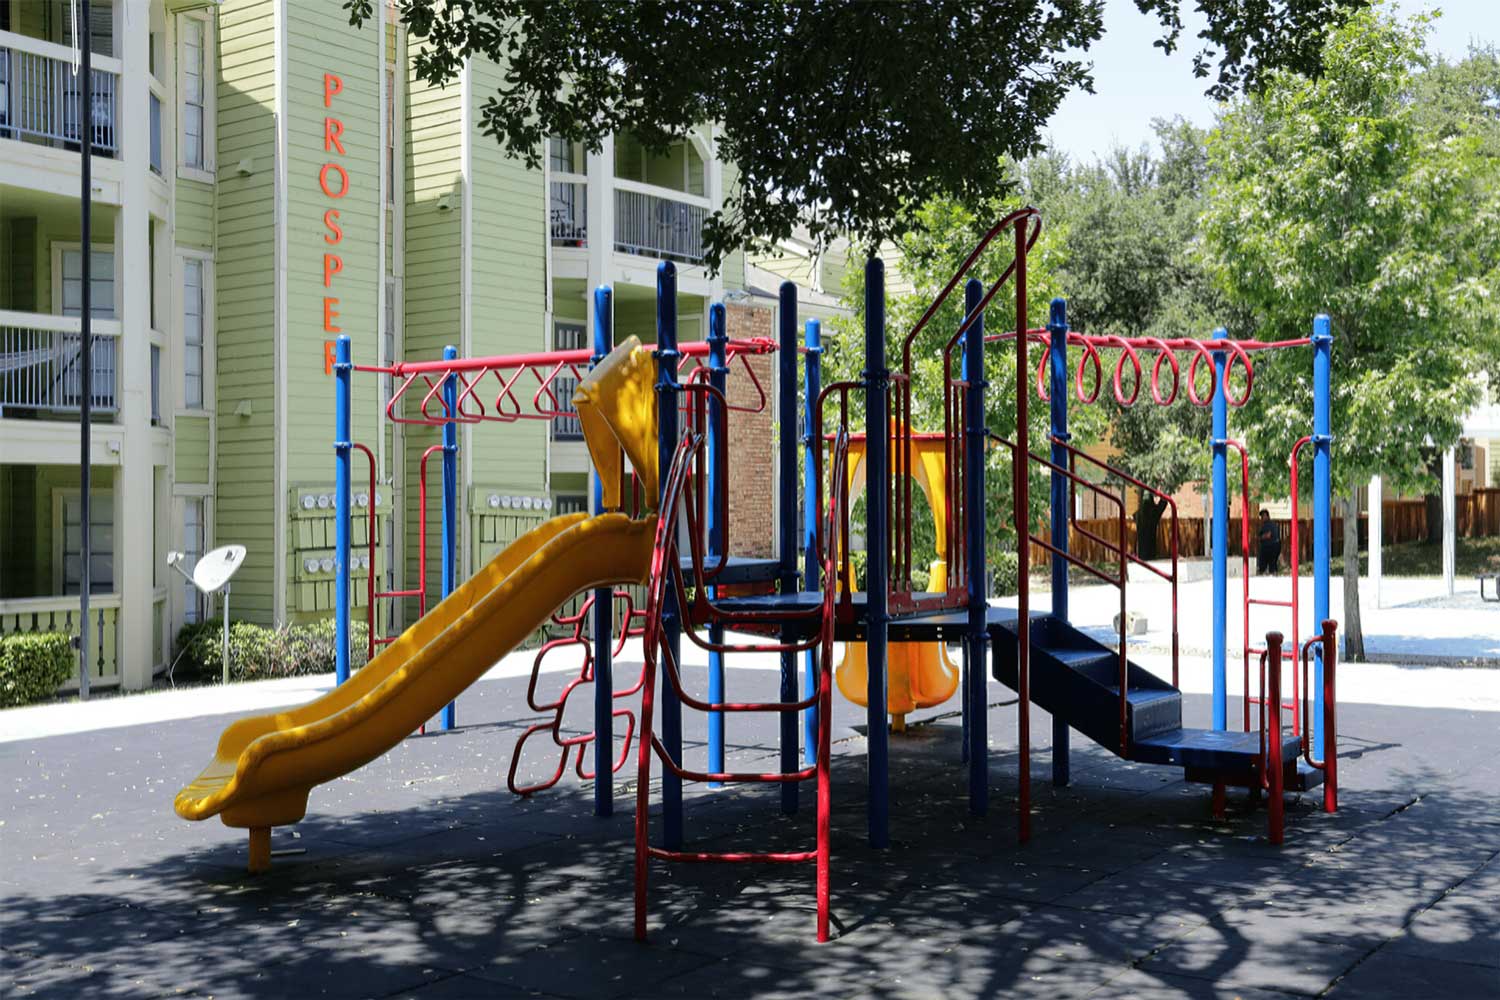 Tides on Leisure Apartments with Children's Playground